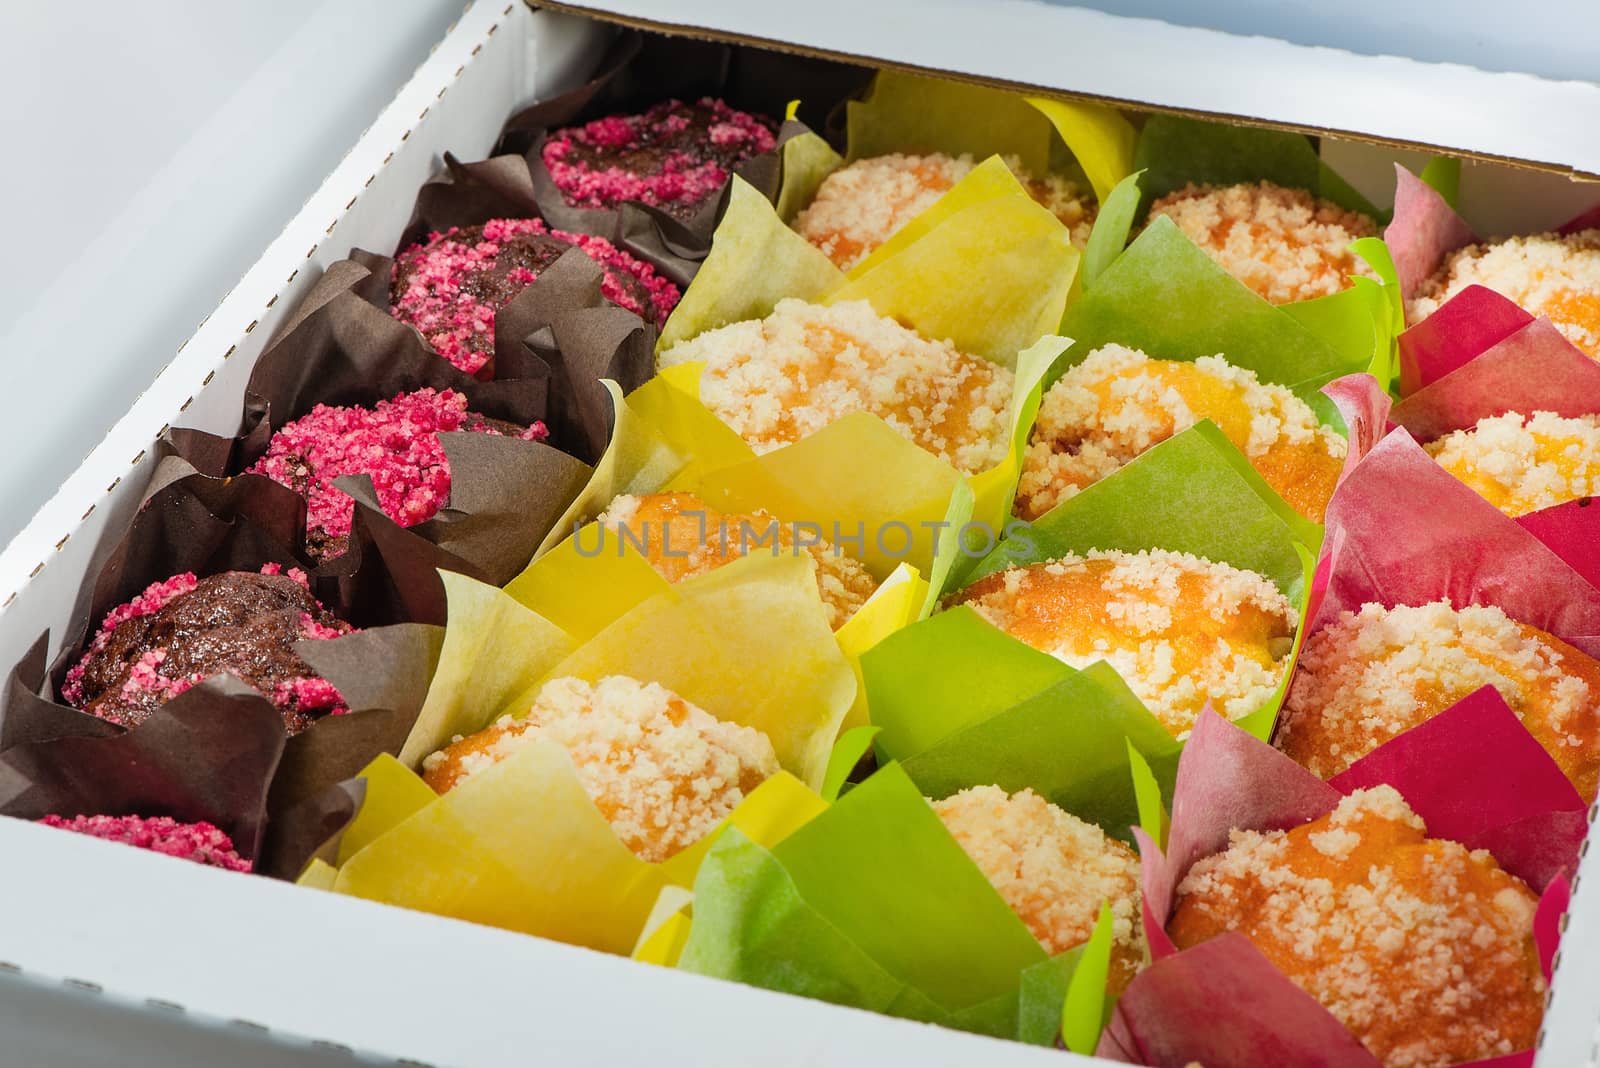 The muffins of different color packed into color paper and into a cardboard box